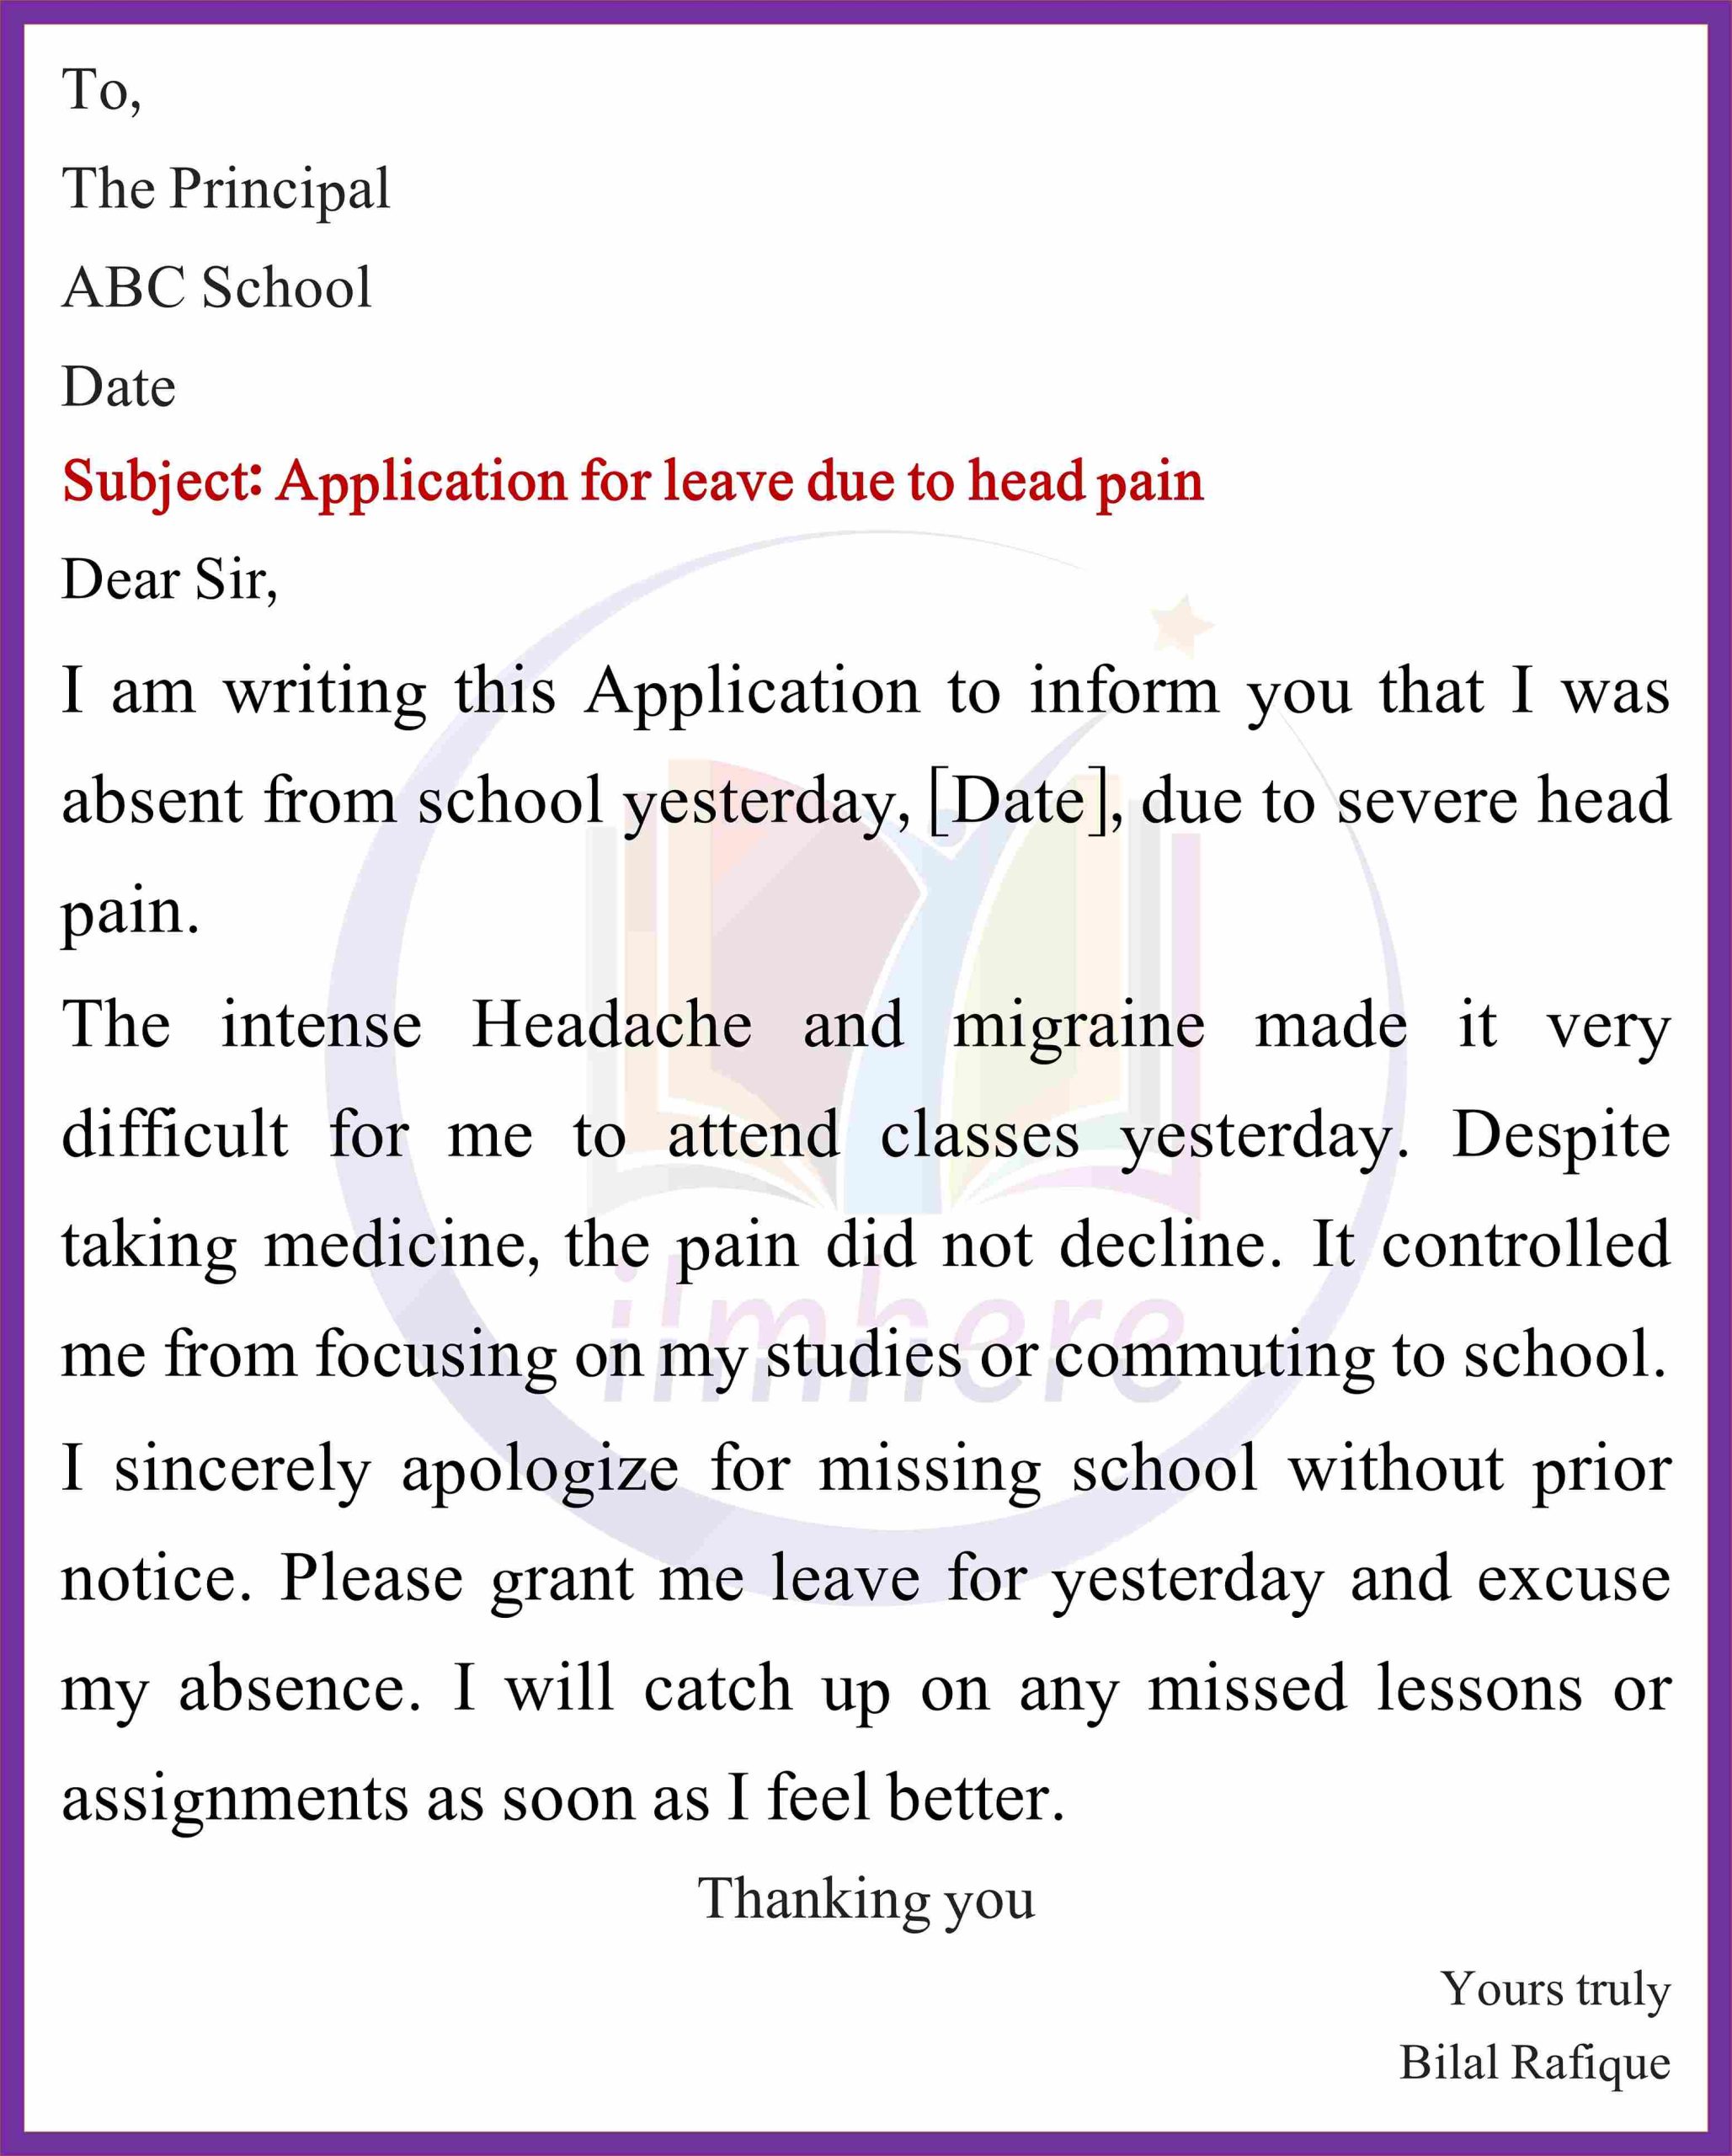 Application for leave due to head pain